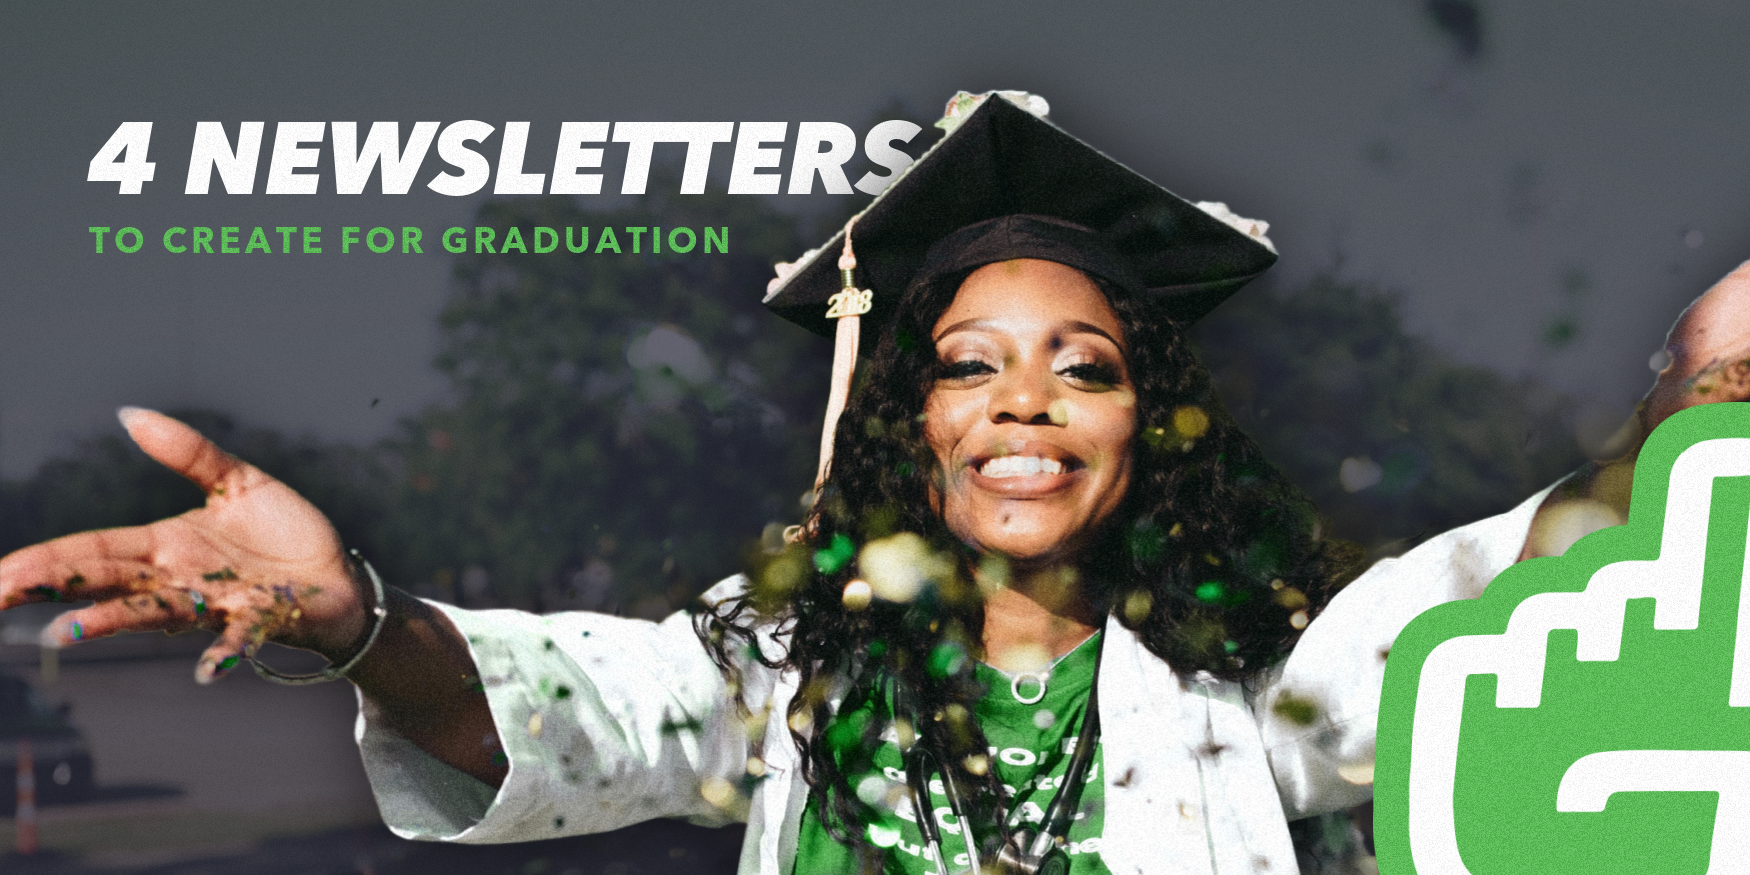 4 Newsletters to Create for Graduation